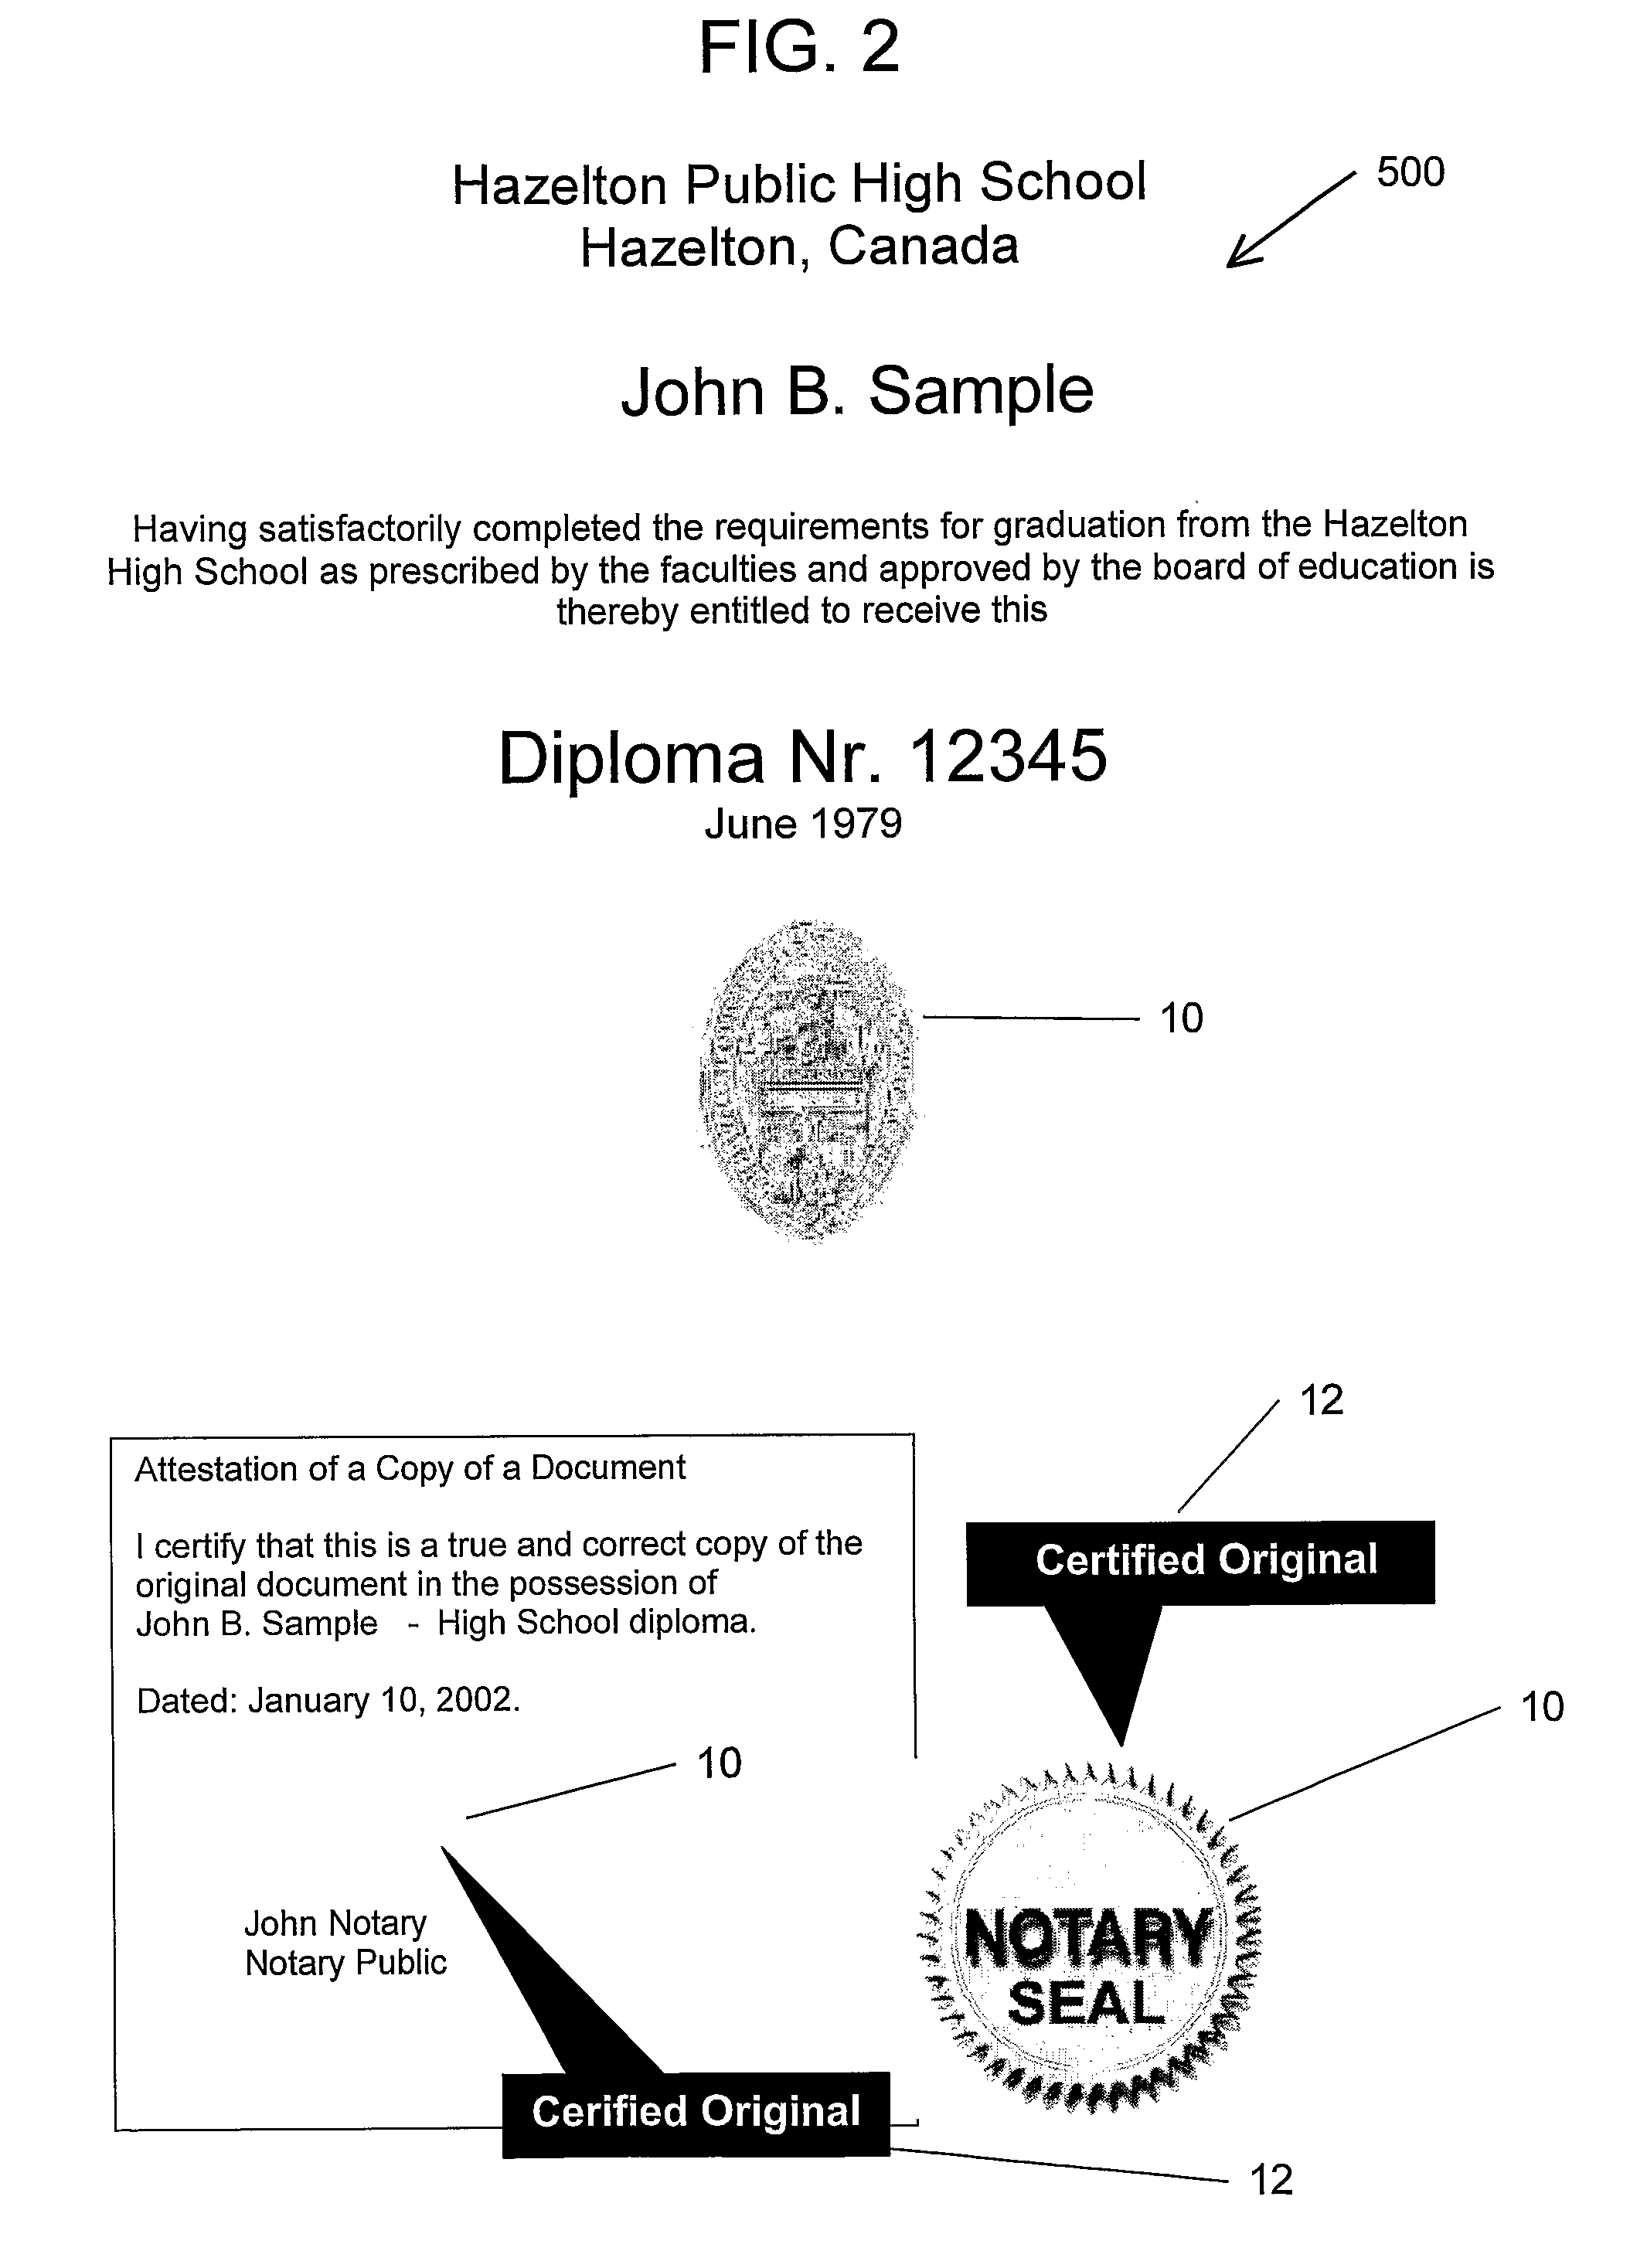 Method and System for Verifying Documents